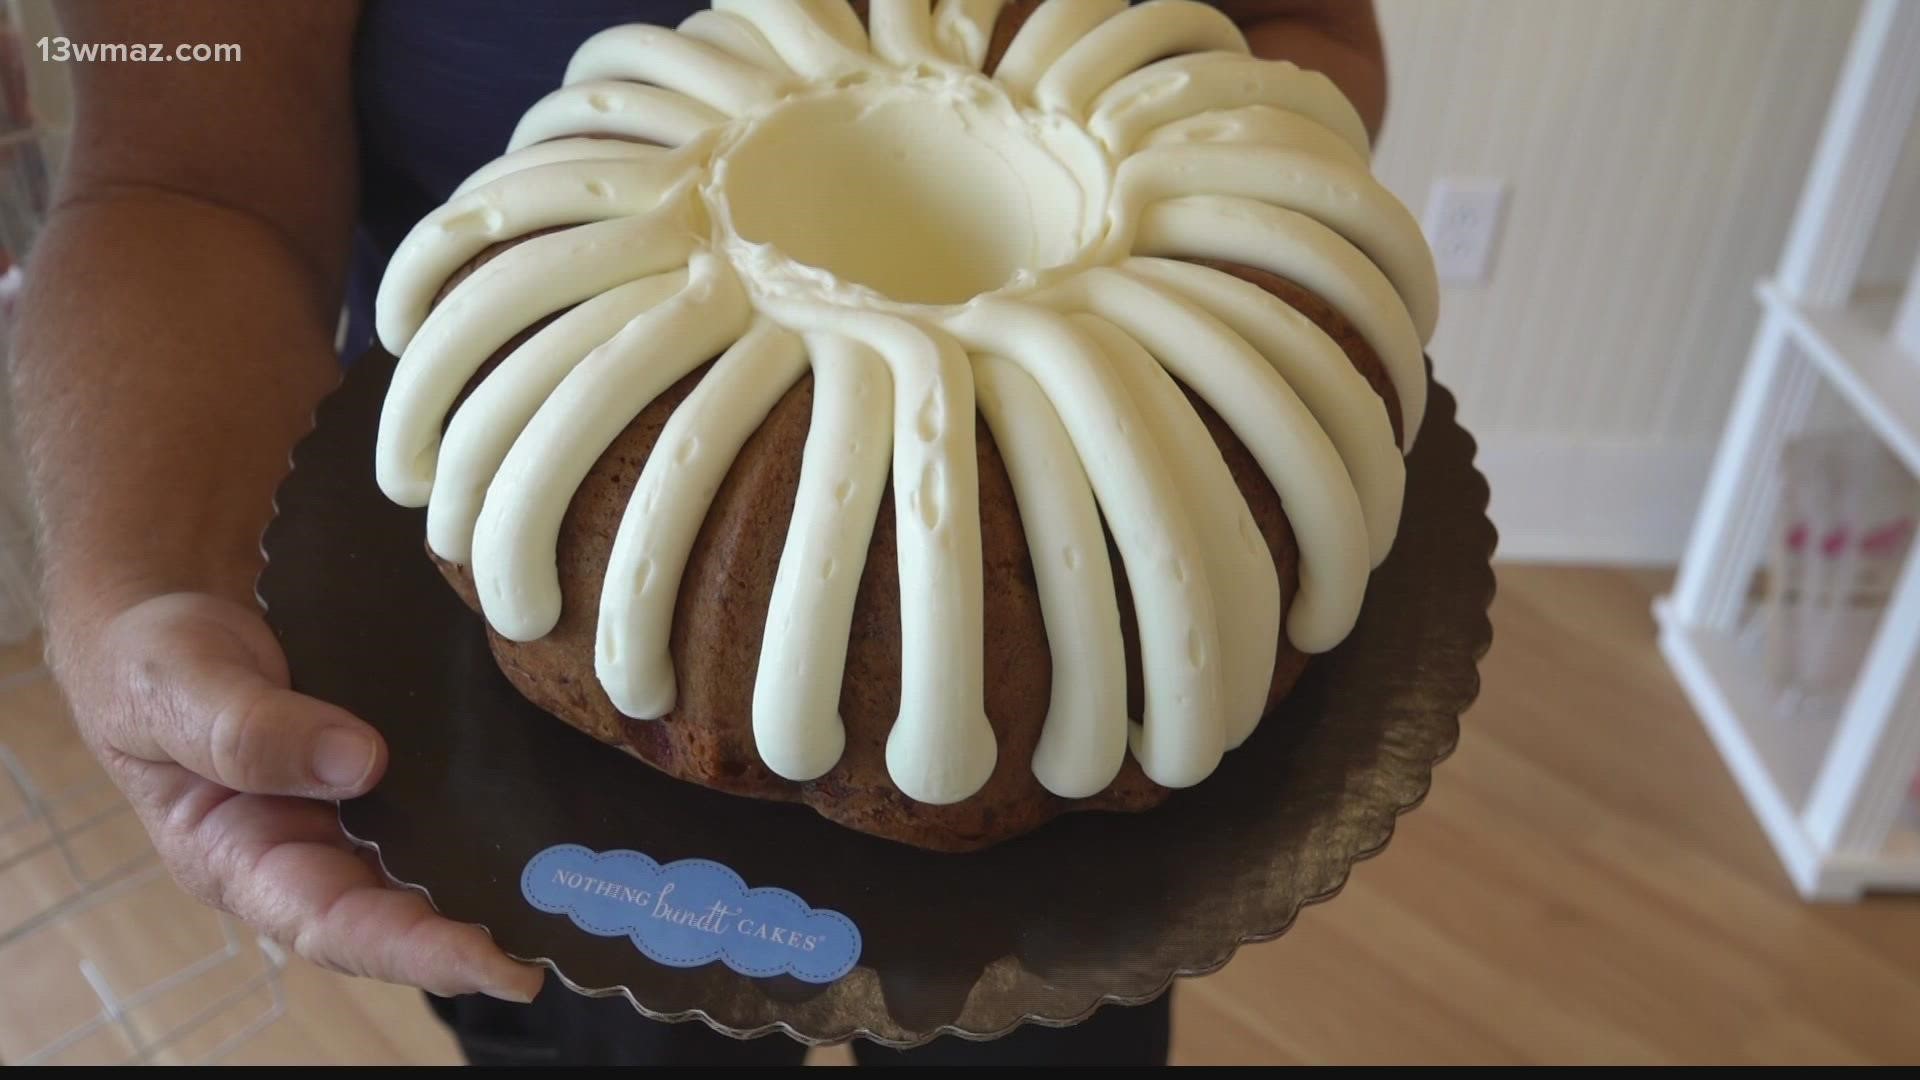 The bakery franchise offering several flavors of Bundt cakes has several locations across the state but is new to Central Georgia.